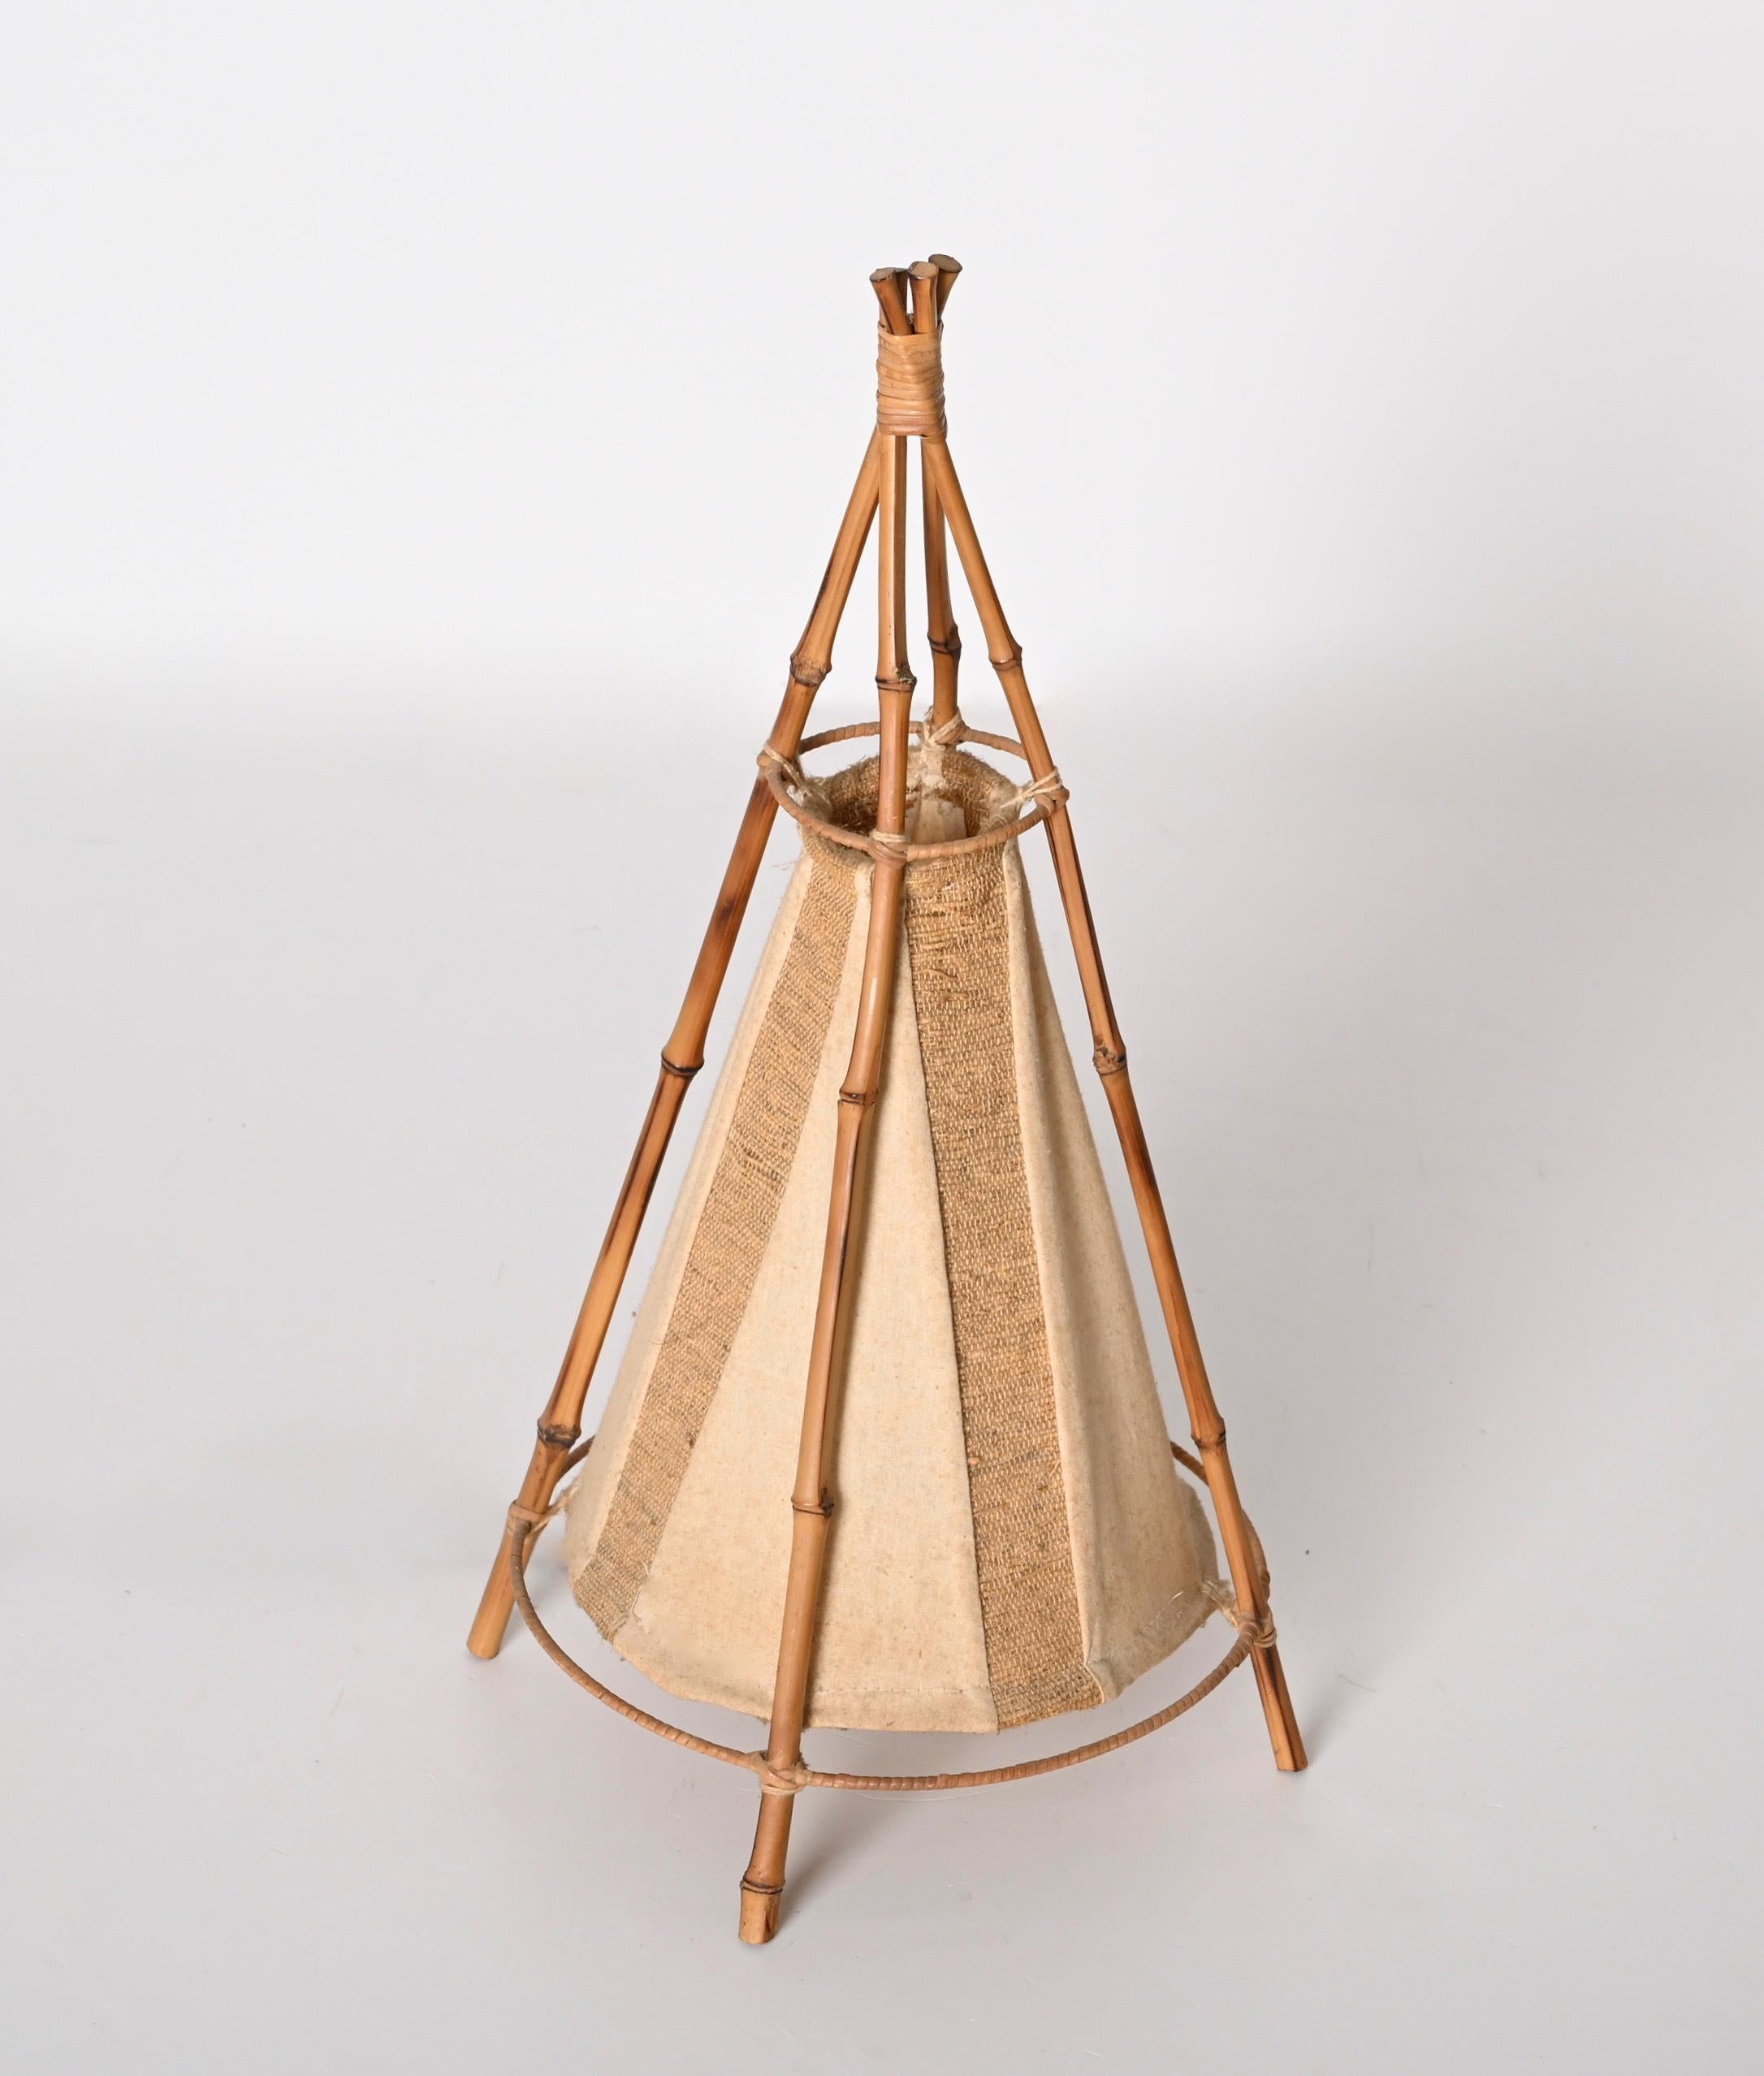 Fabric Louis Sognot Midcentury Cotton, Bamboo and Rattan Italian Table Lamp, 1950s For Sale